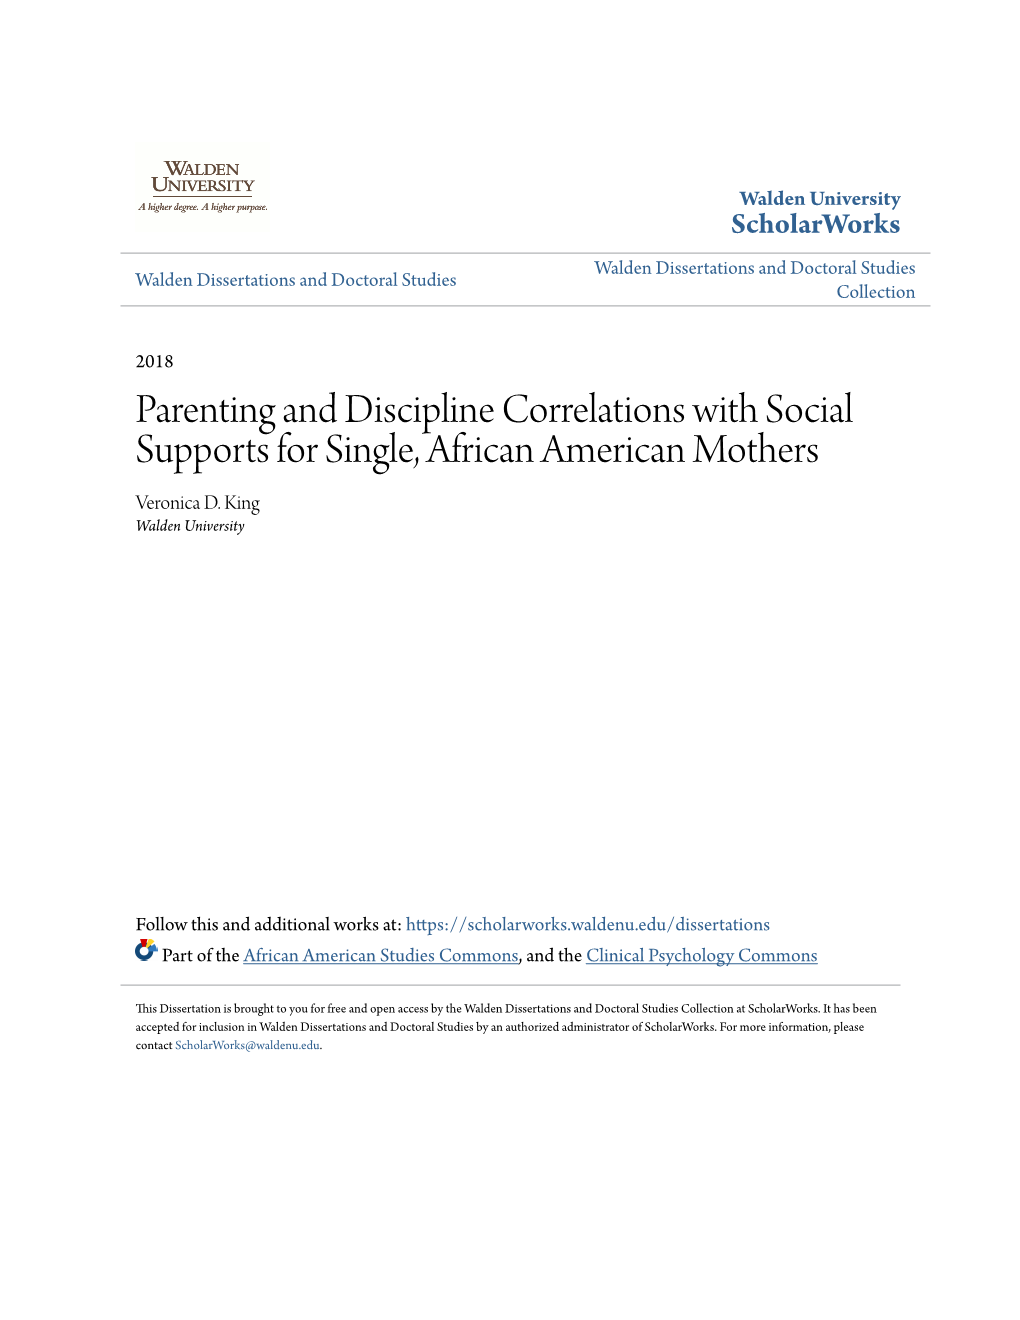 Parenting and Discipline Correlations with Social Supports for Single, African American Mothers Veronica D